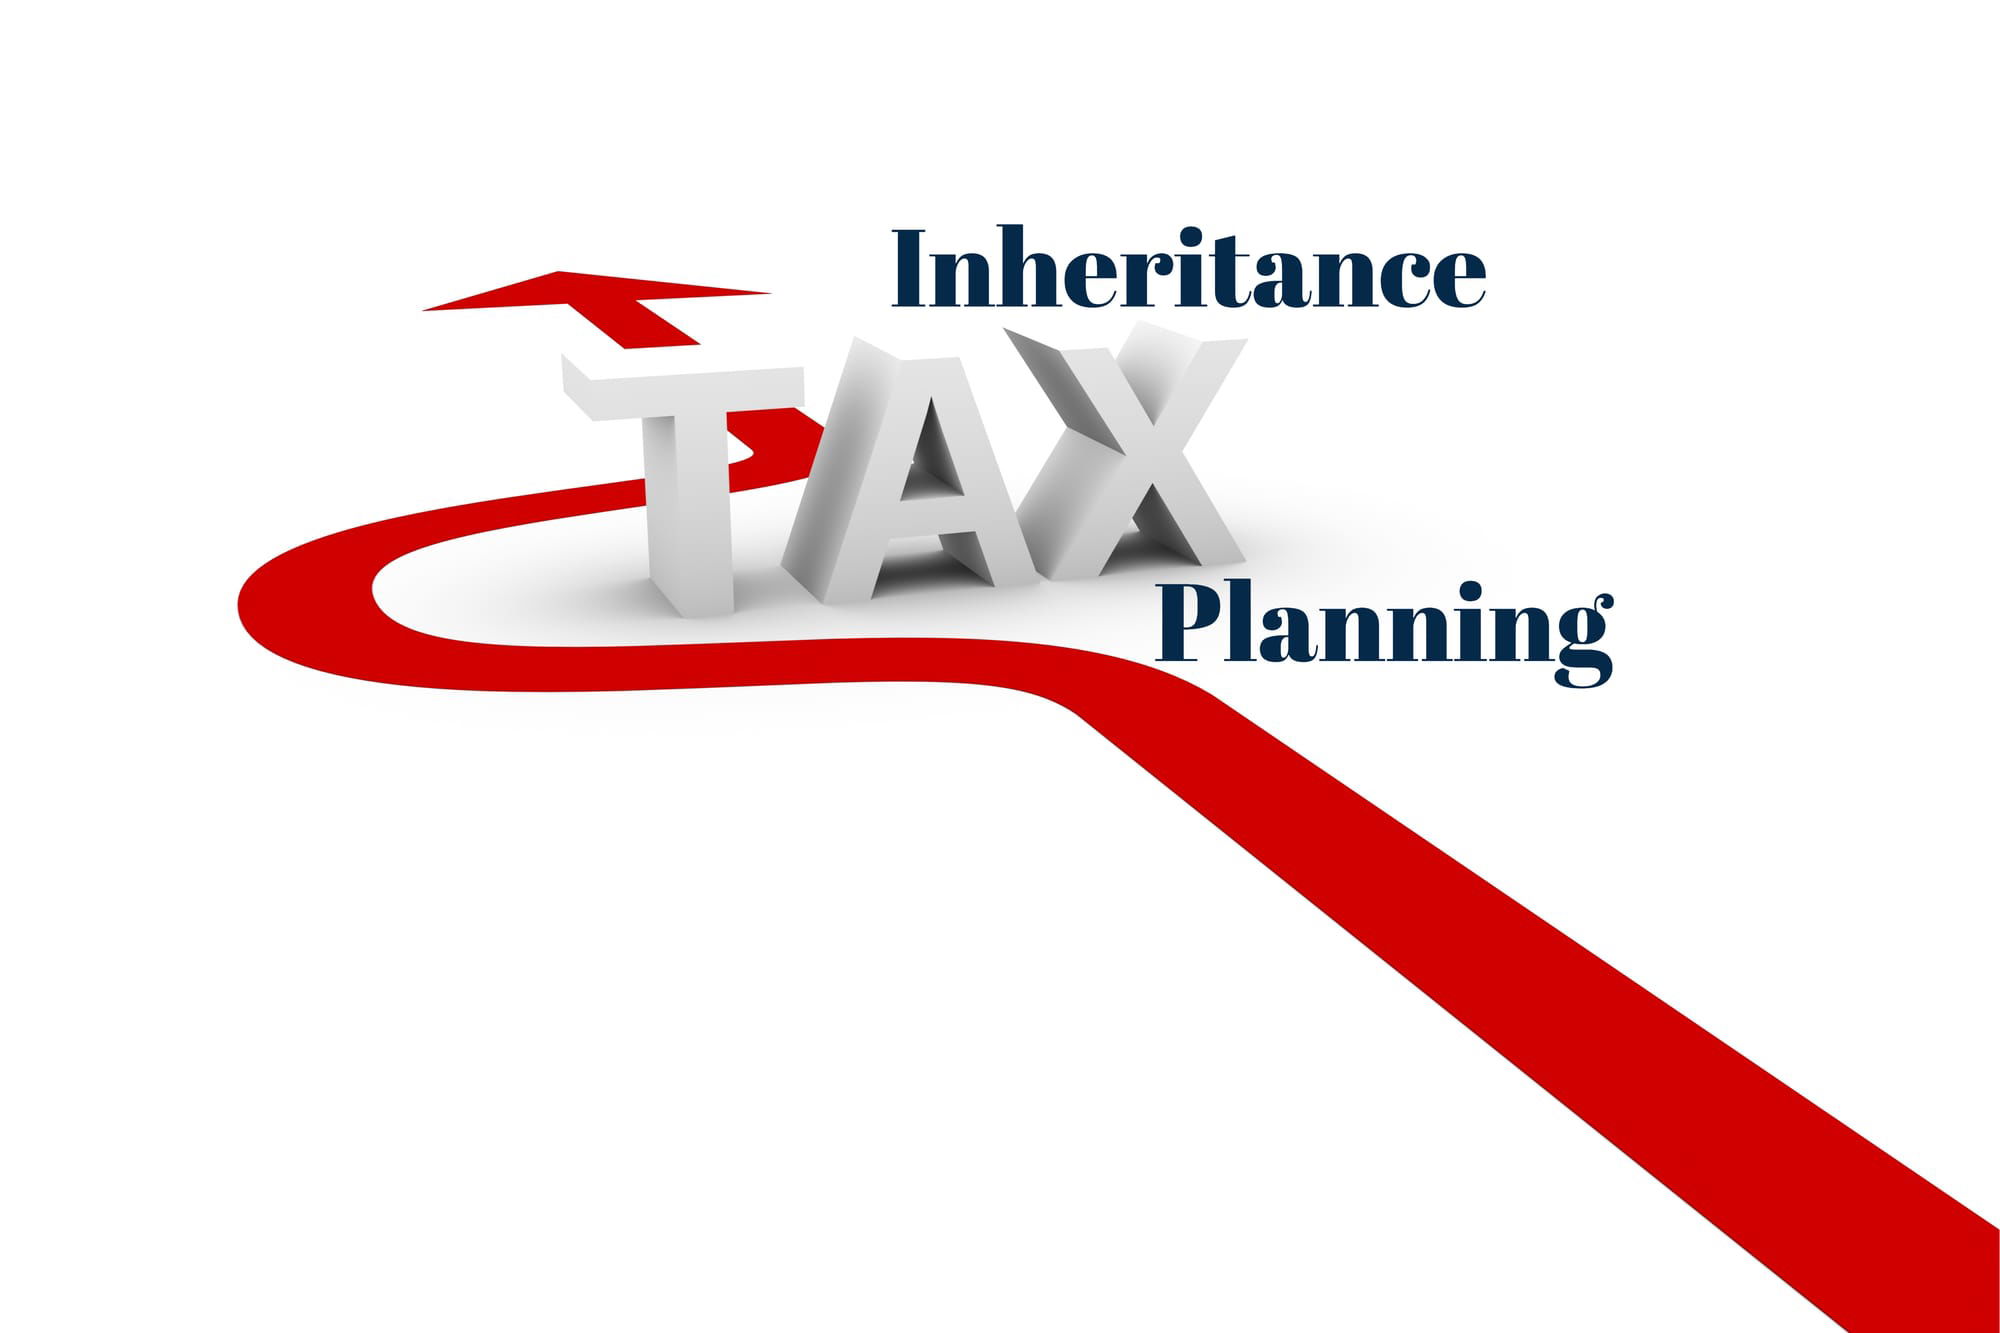 A Guide to Inheritance Tax Planning (IHT) (MAR 2020)